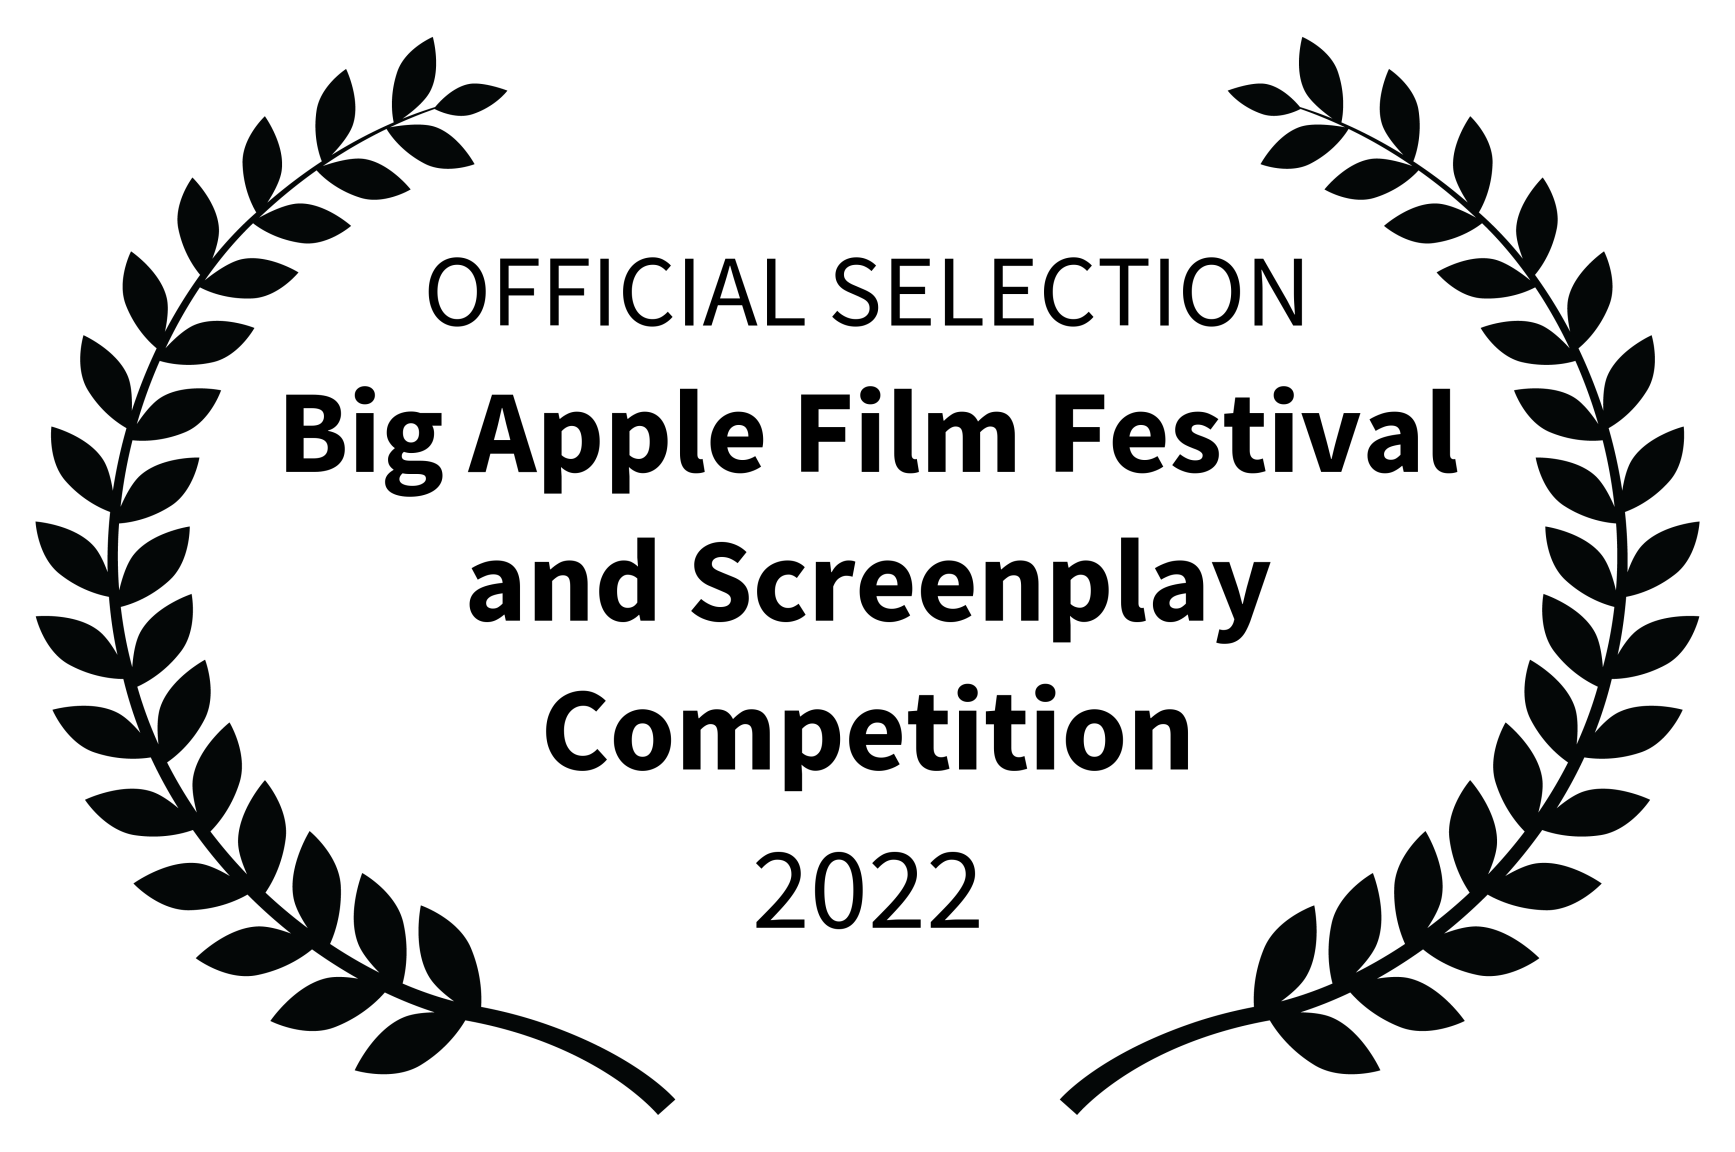 OFFICIAL SELECTION - Big Apple Film Festival and Screenplay Competition - 2022